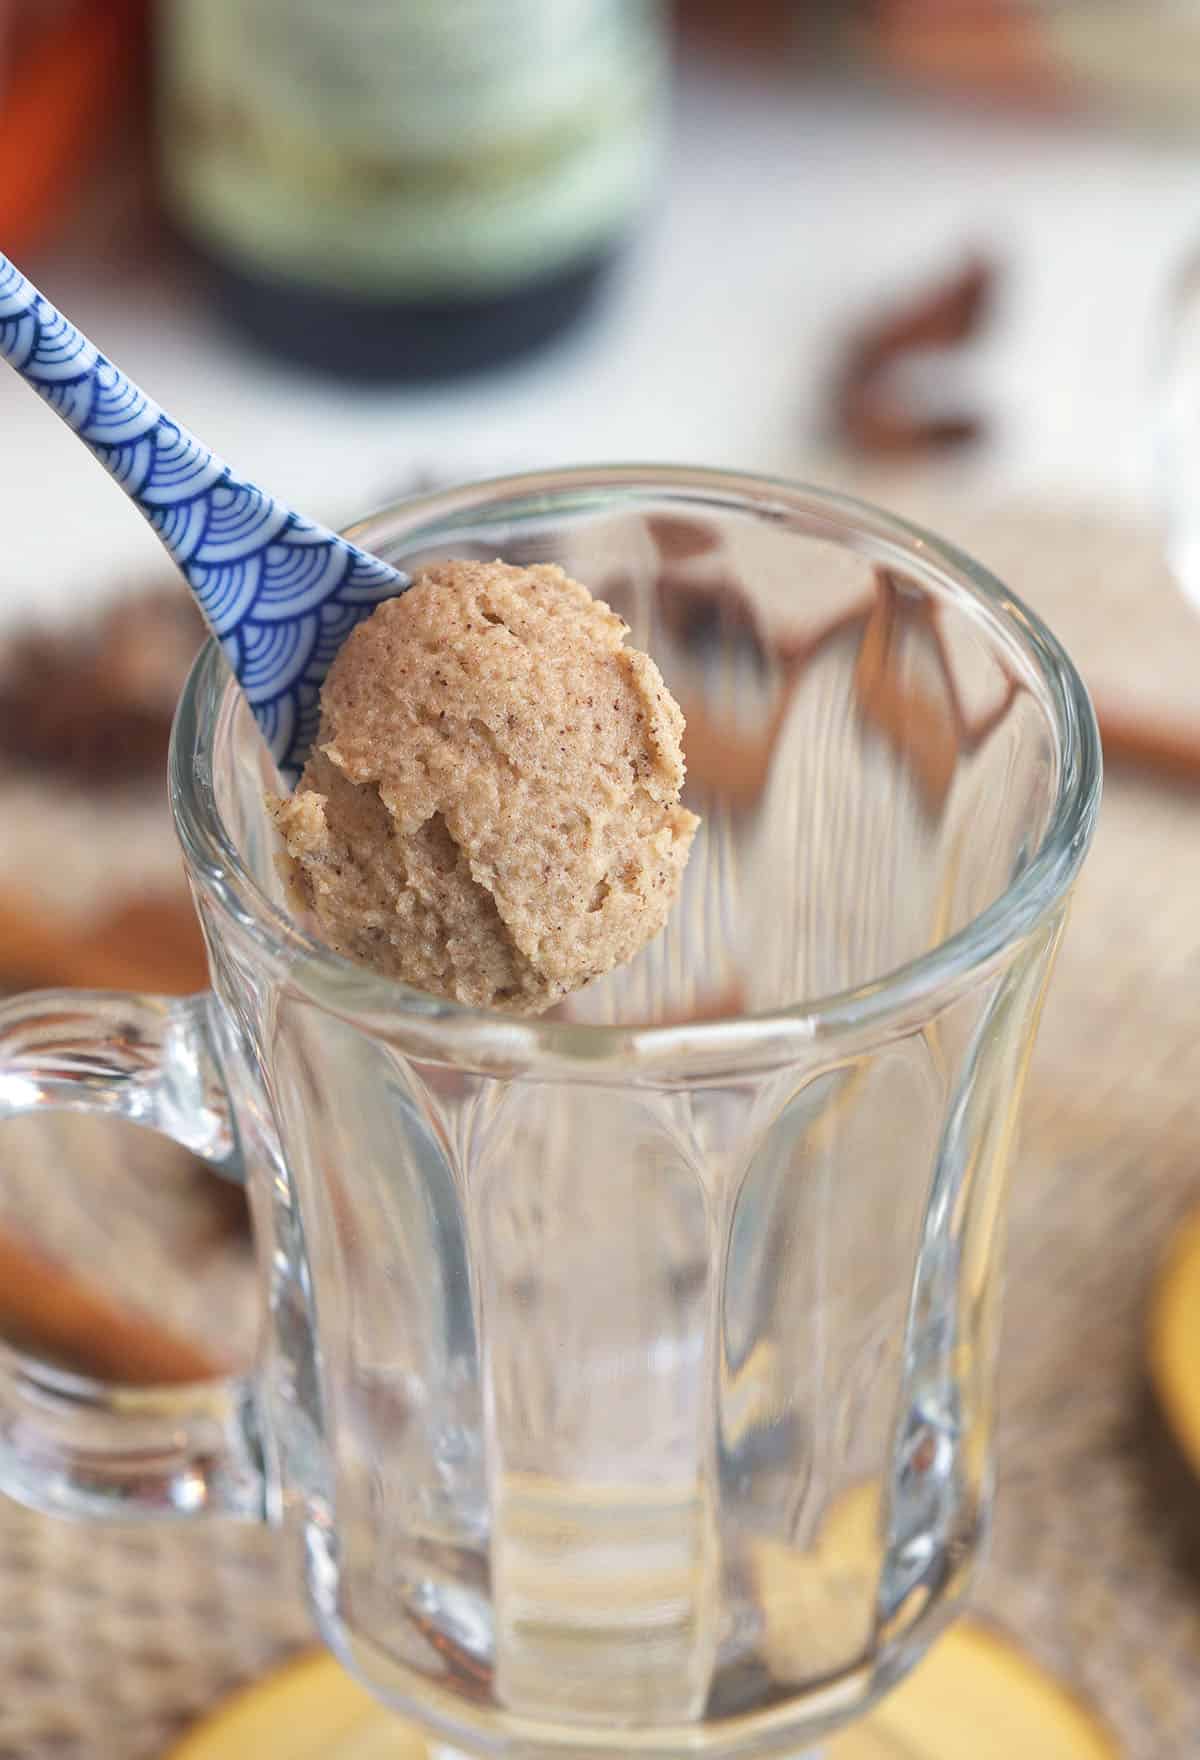 A spoonful of spiced butter is held above a glass mug.